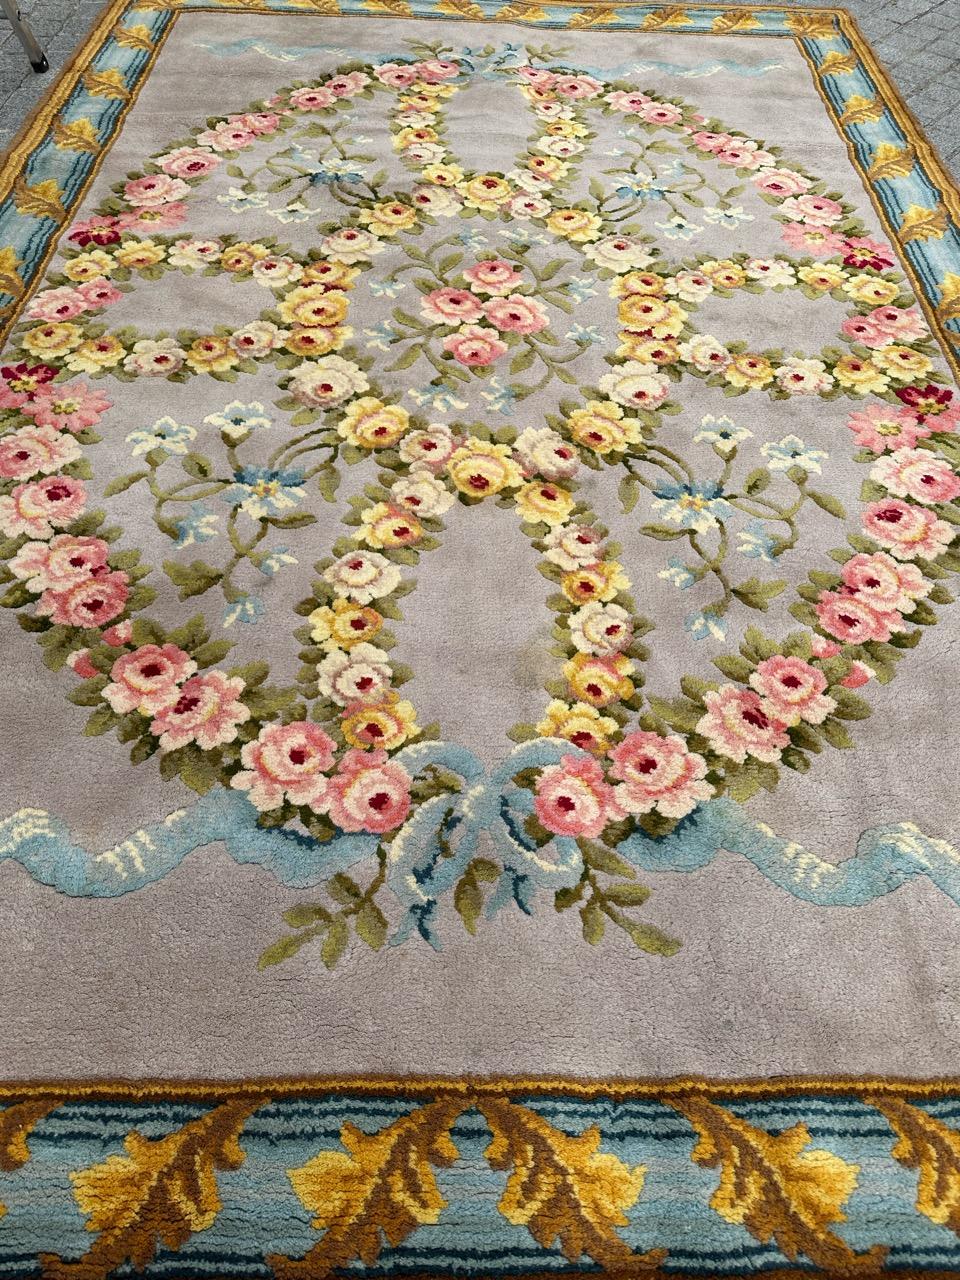 Presenting a regal masterpiece from the prestigious Beauvais manufacturing: an exquisite early 20th-century French Savonnerie rug. This royal treasure features intricate floral designs and a rich array of colors. Hand-knotted with wool velvet on a